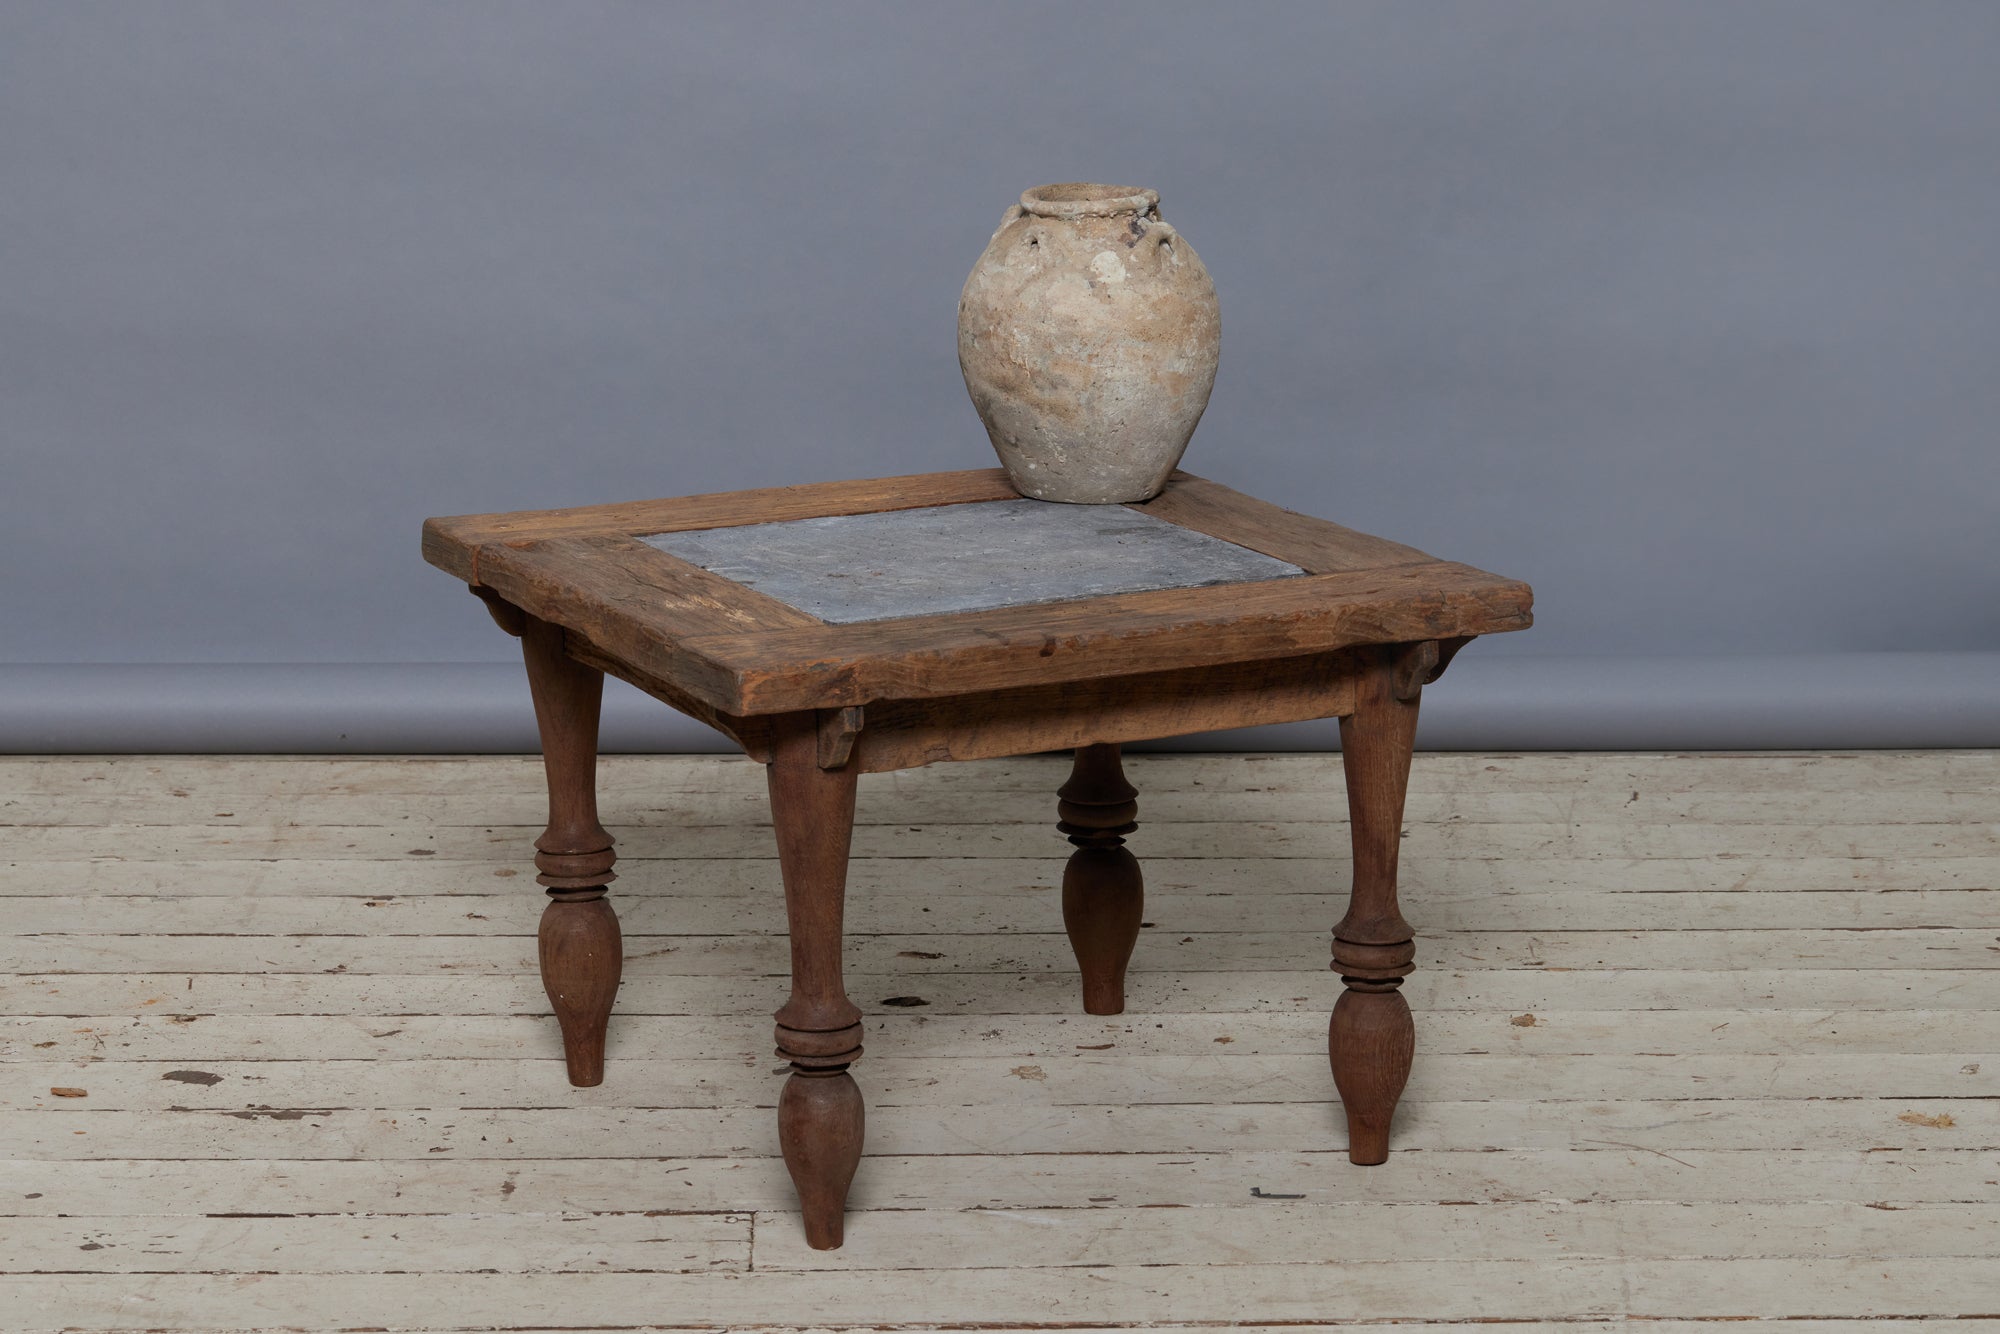 Square Teak Coffee Table with Single Inset Piece of 17th Century Belgian Blue Stone